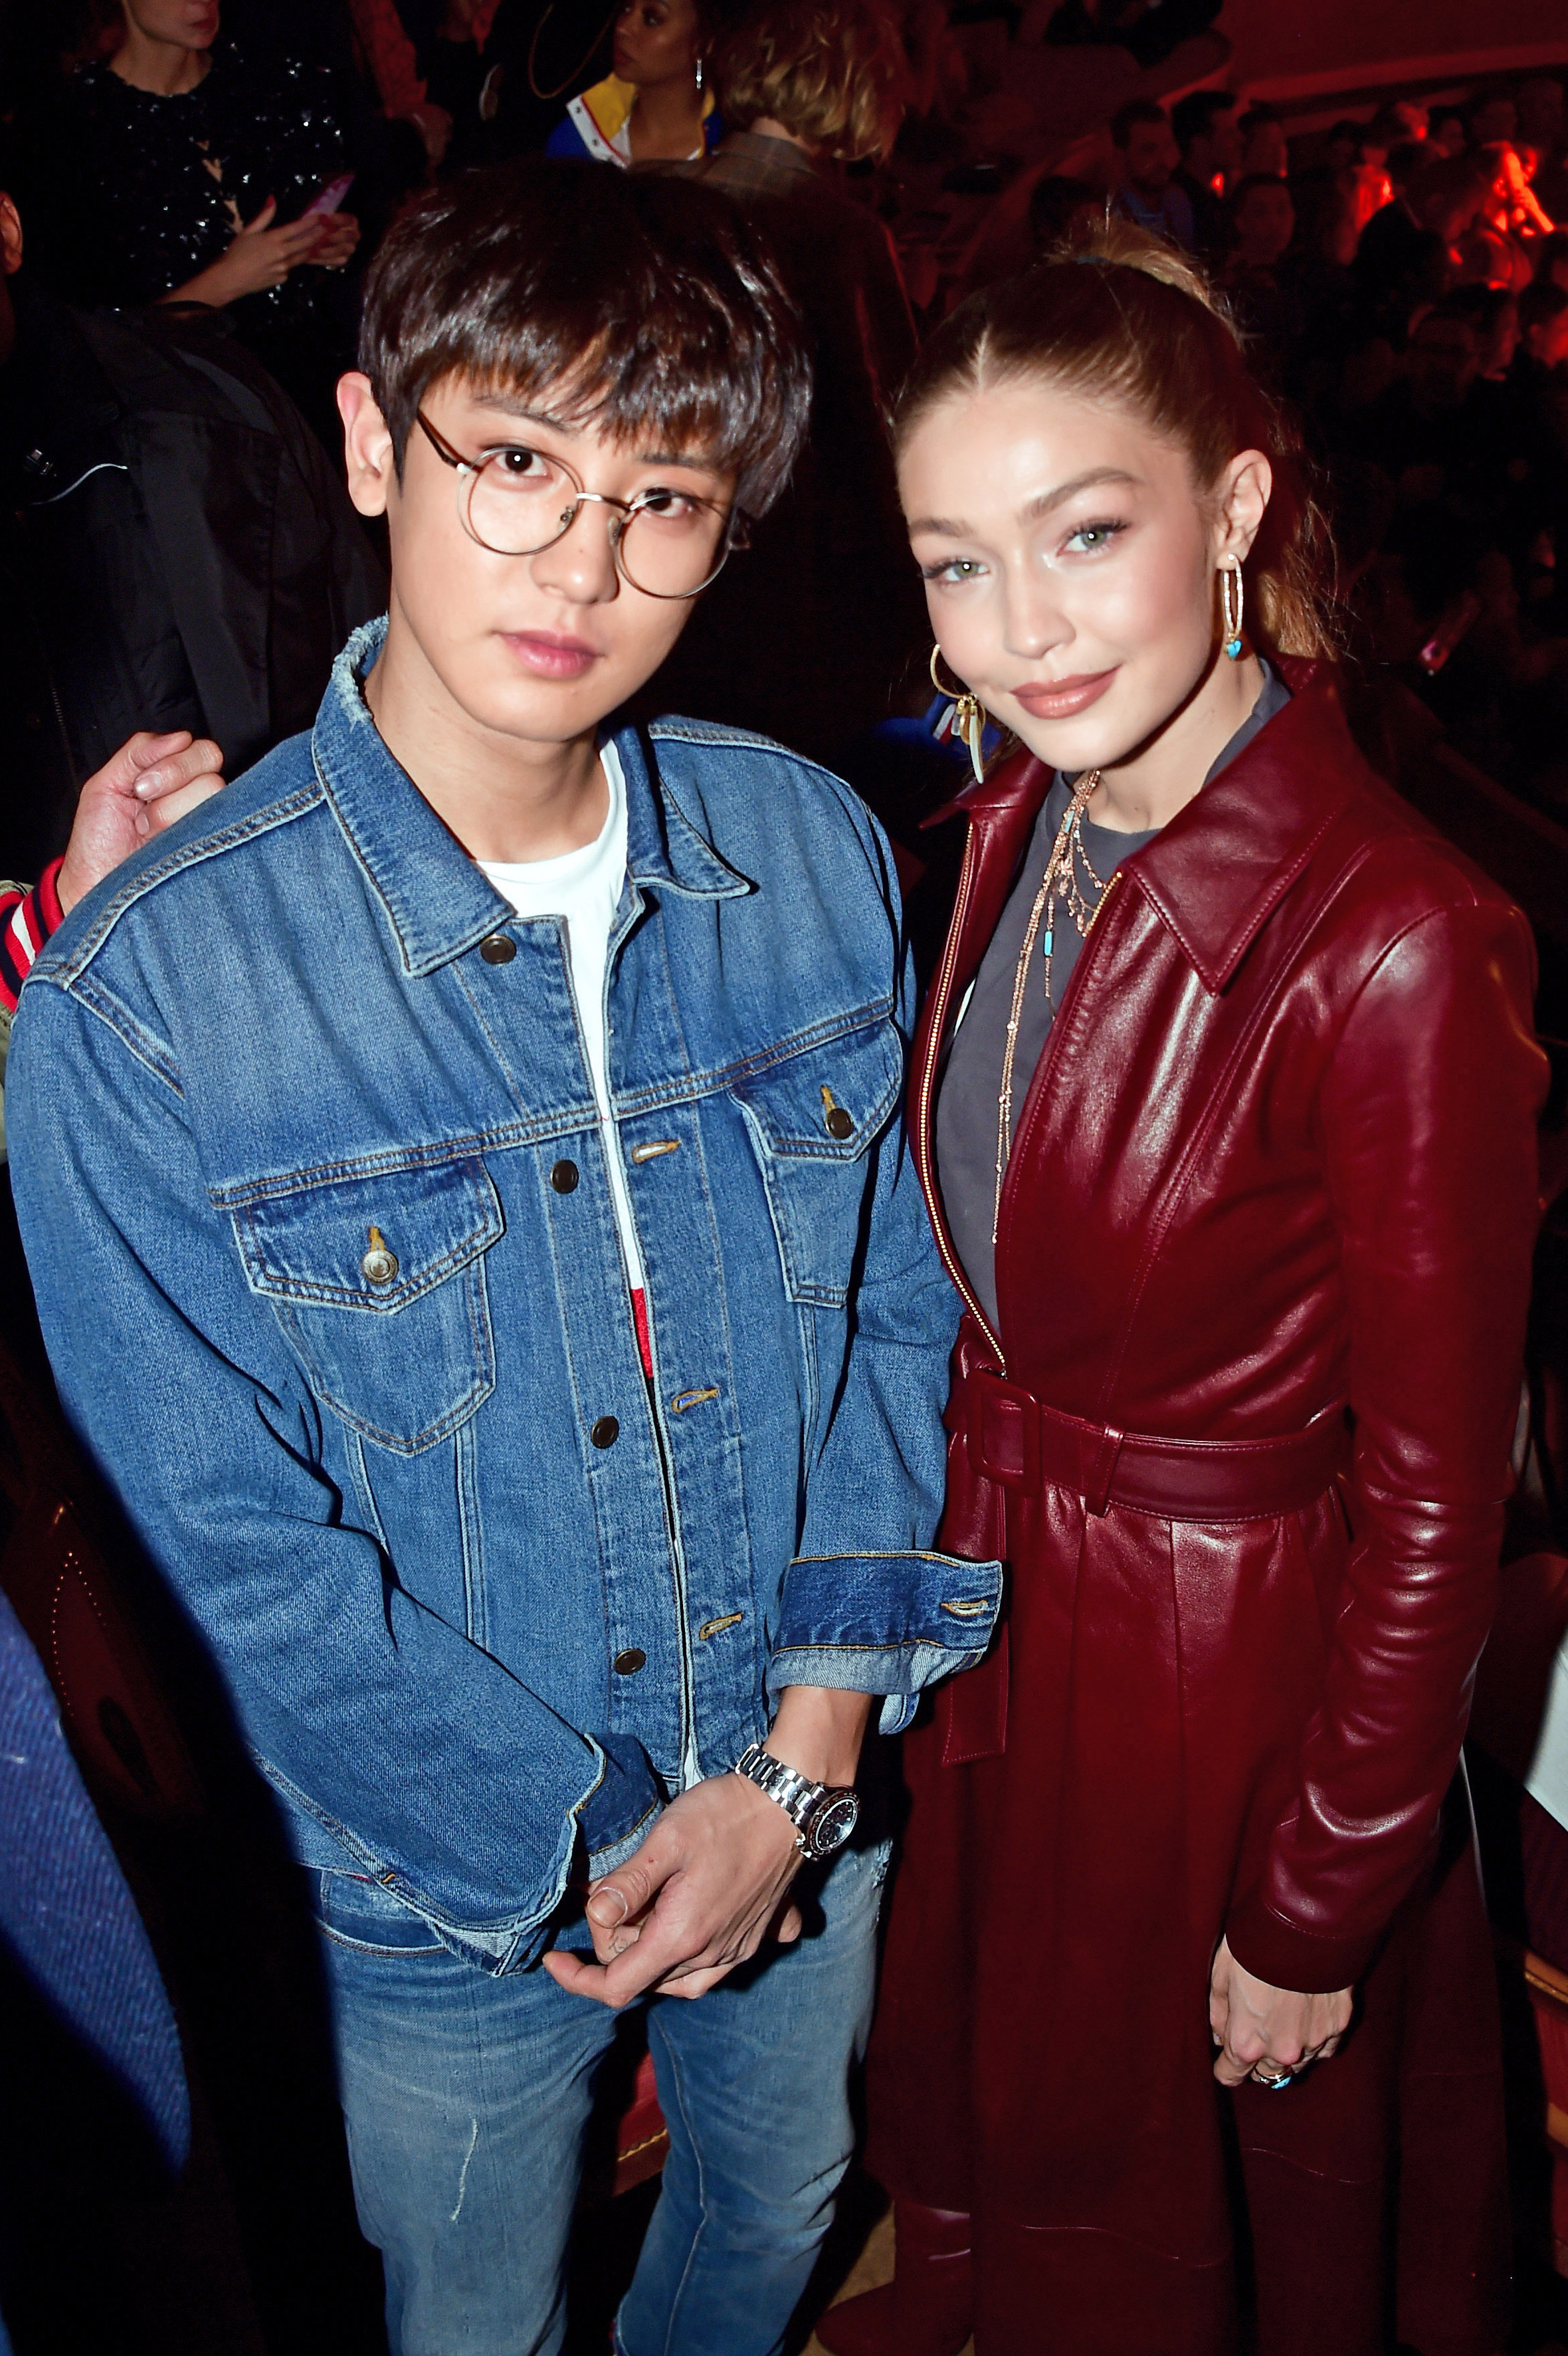 PARIS, FRANCE - MARCH 02: (L-R) Chanyeol Park and Gigi Hadid attend the Tommy Hilfiger TOMMYNOW Spring 2019 : TommyXZendaya Premieres at Theatre des Champs-Elysees on March 02, 2019 in Paris, France. (Photo by Anthony Ghnassia/Getty Images For Tommy Hilfiger)